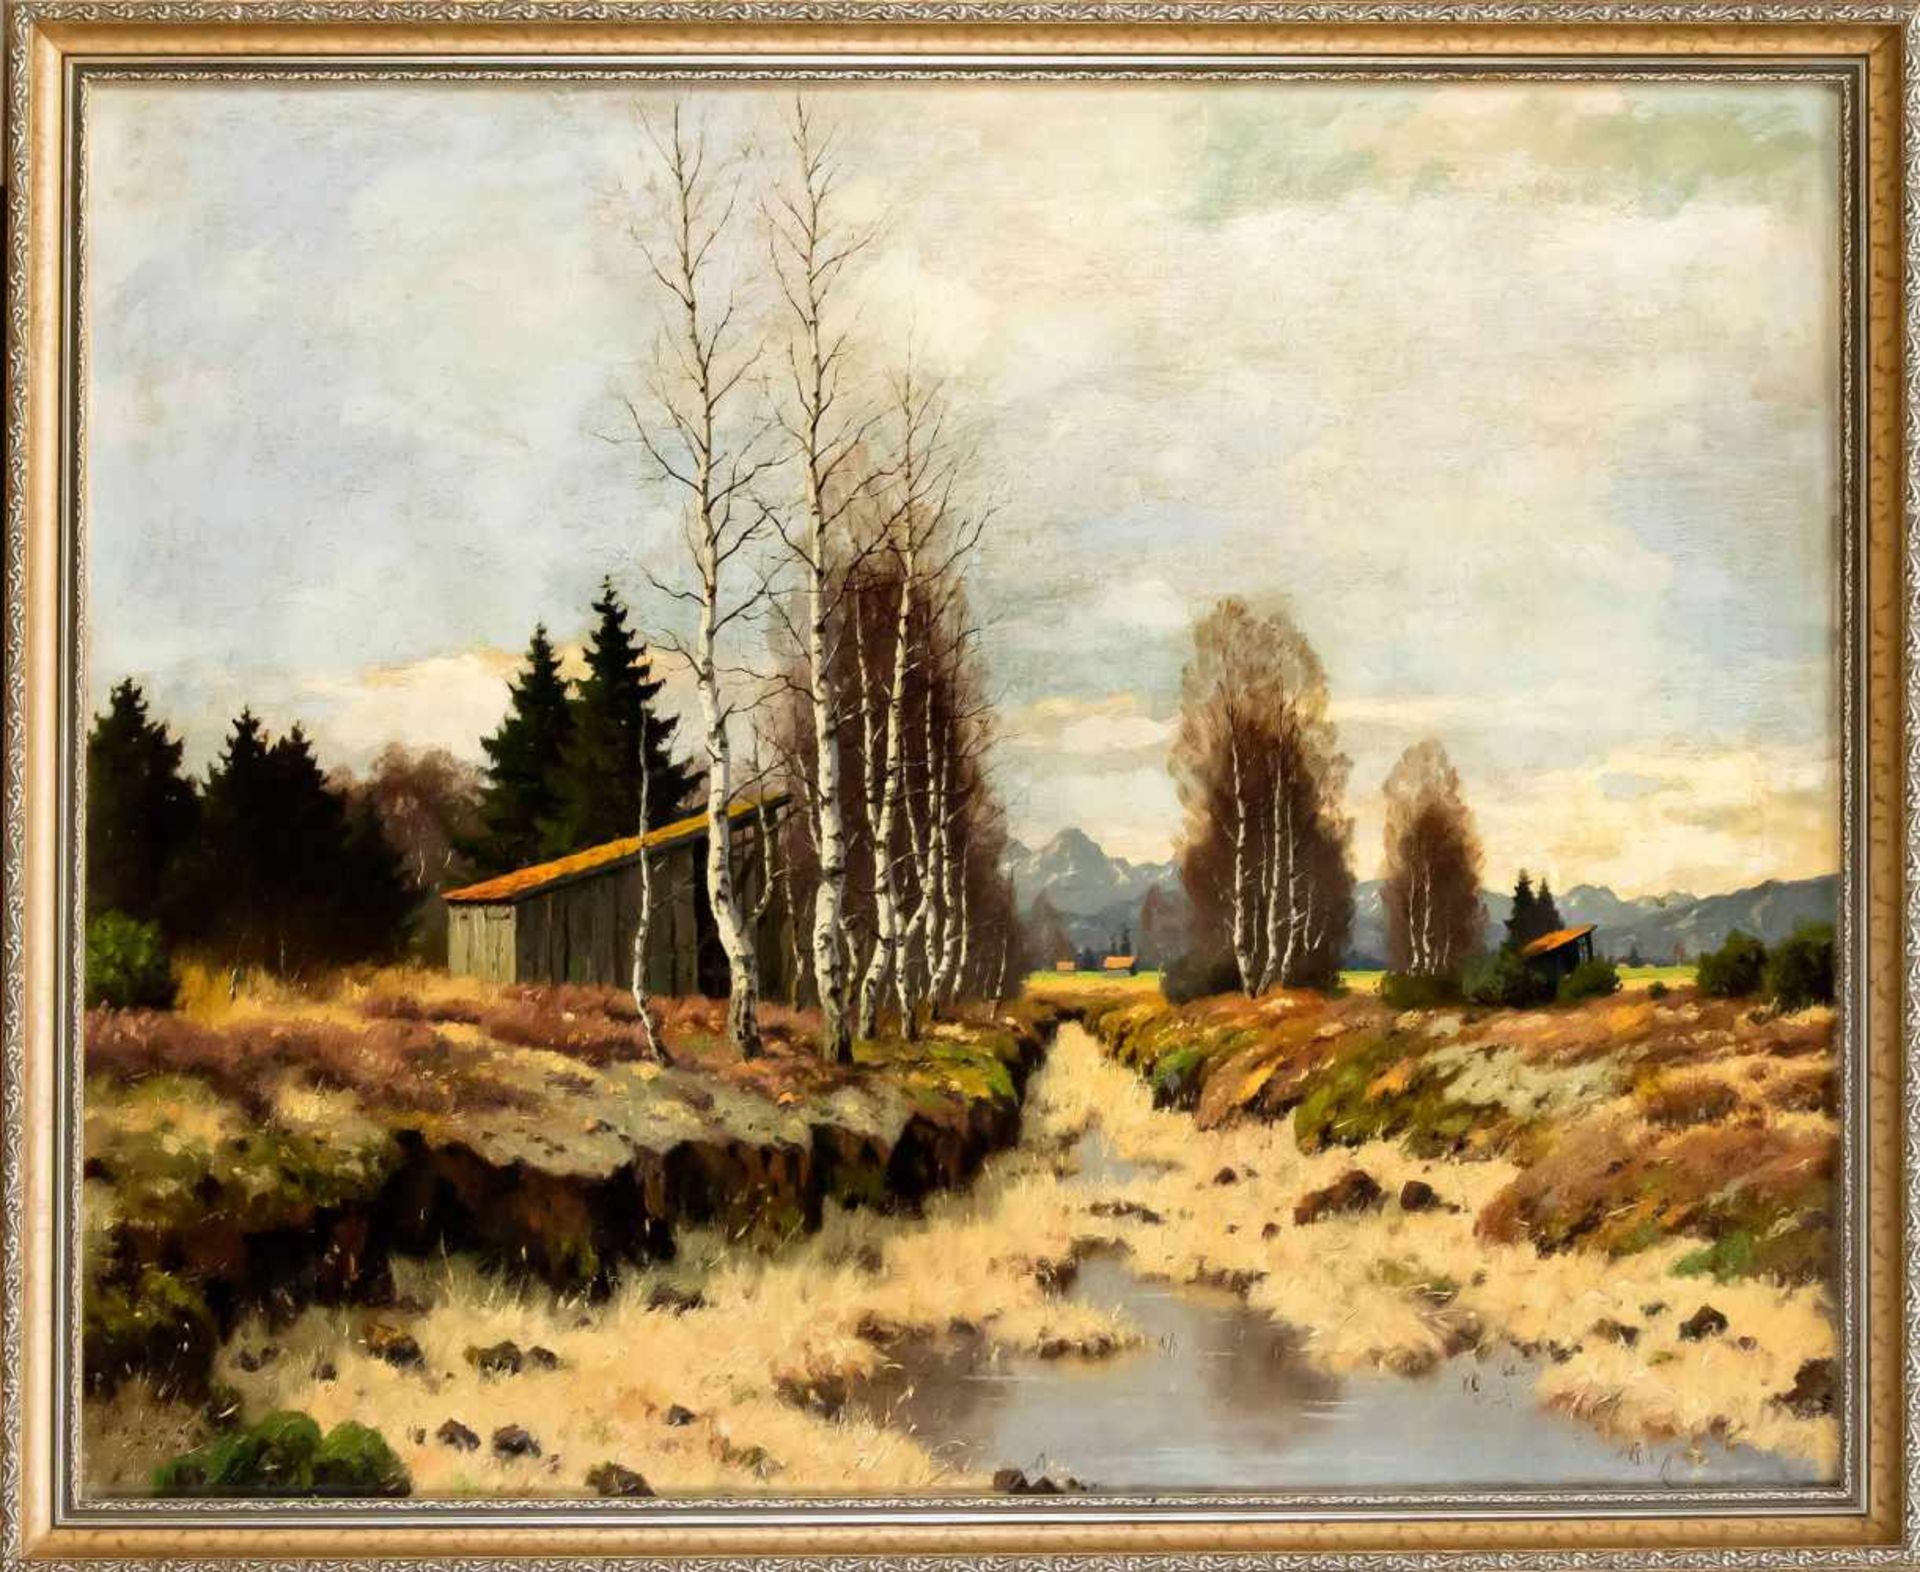 Karl Schaette (1884-1951), Munich landscape painter, Moor in the Prealps, oil on canvas,signed lower